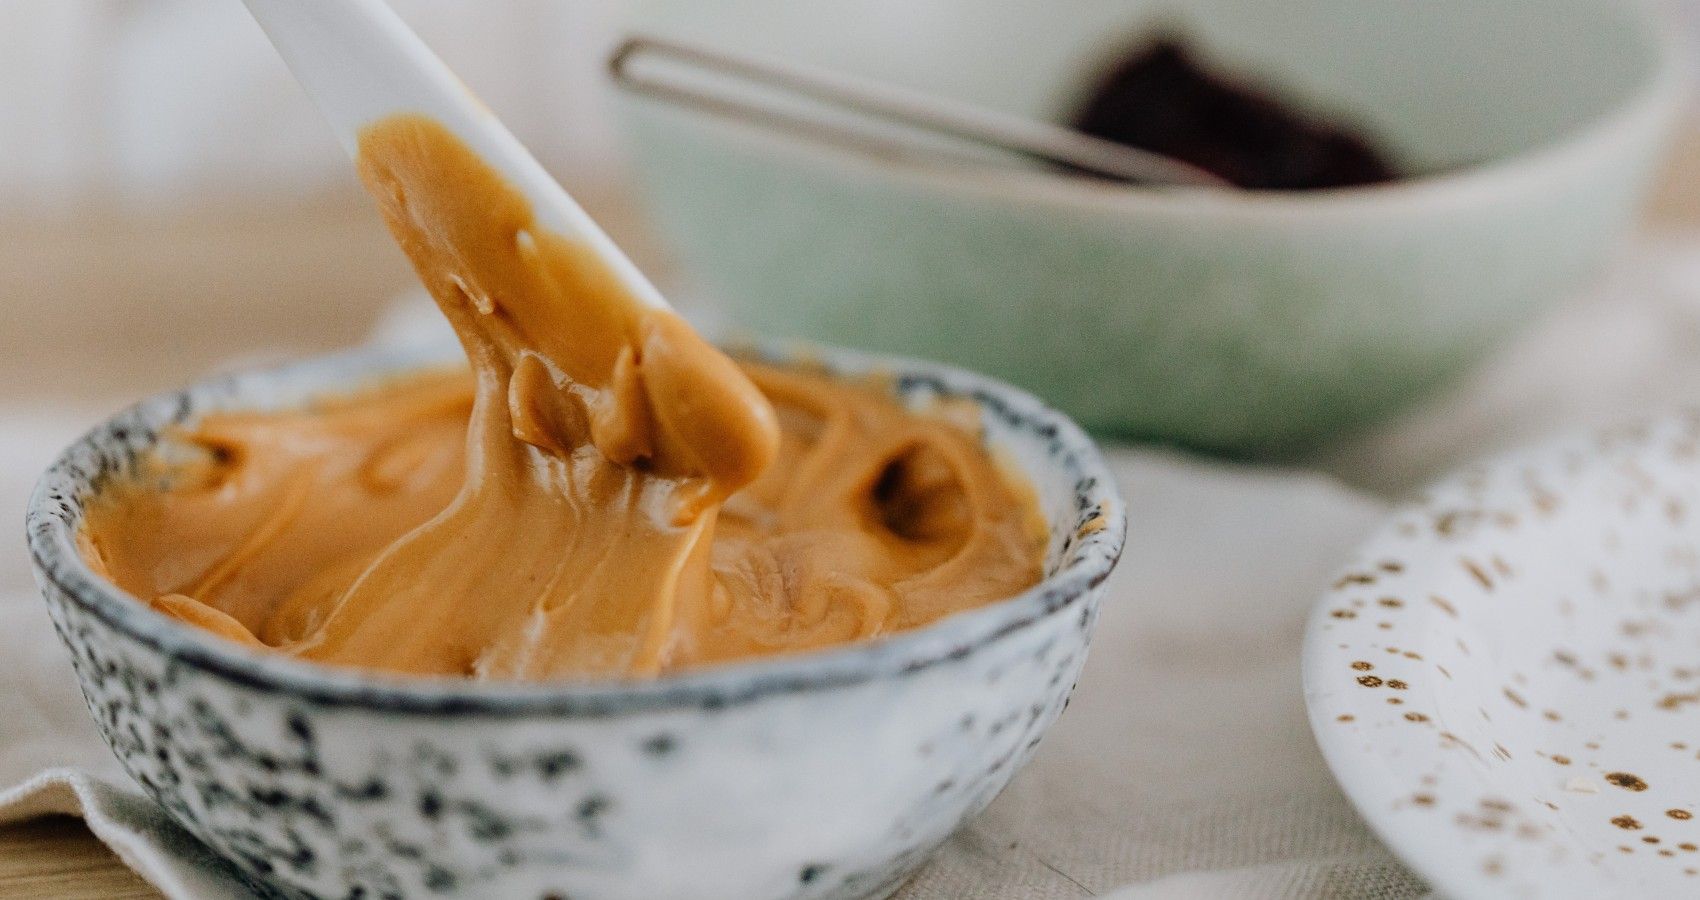 A Bowl Of Peanut Butter To Introduce Early To Babies